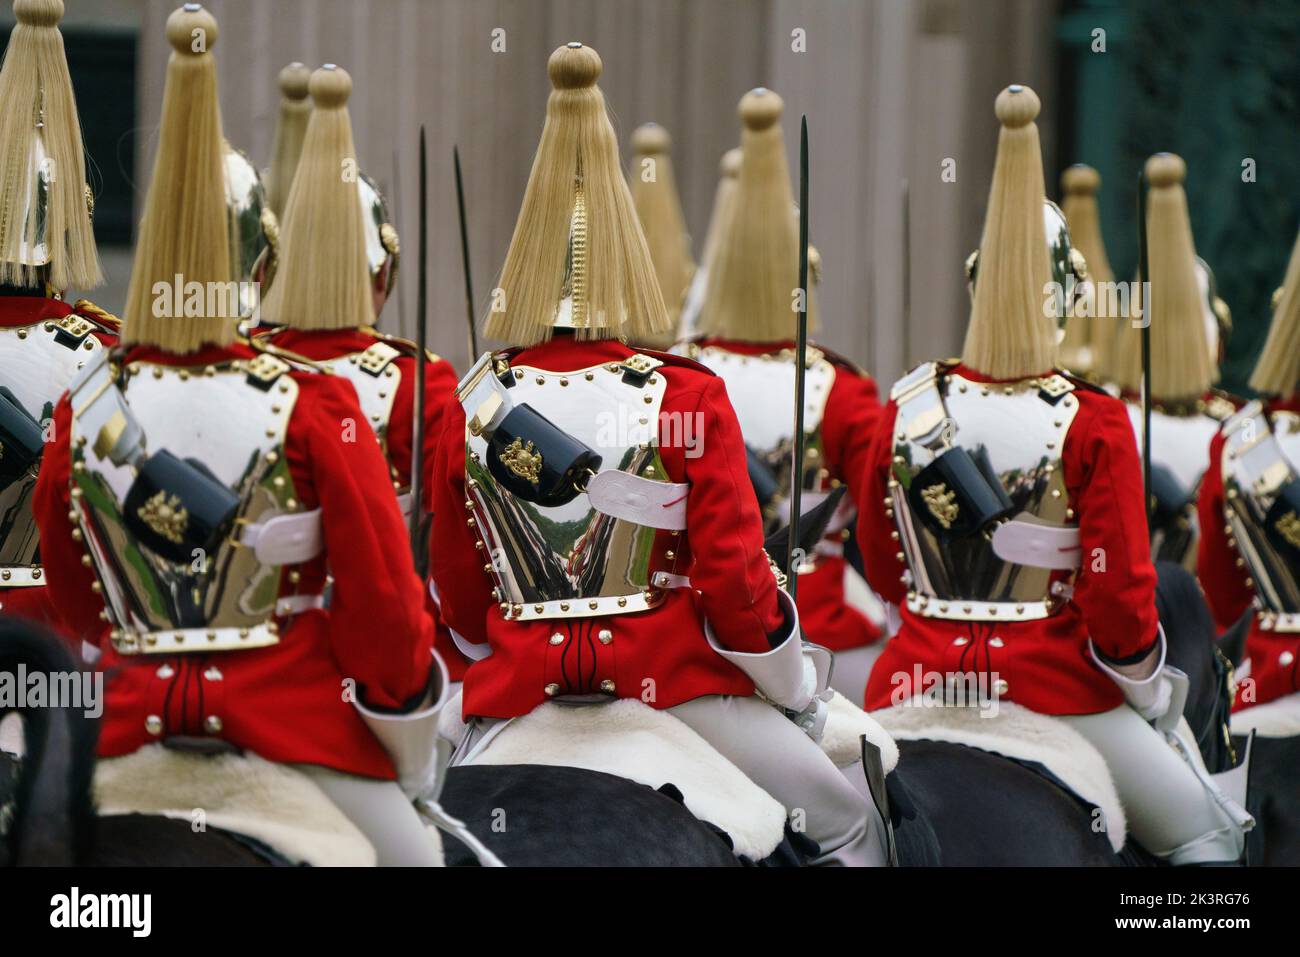 LONDON - SEPTEMBER 19: The Household Cavalry is made up of the two most senior regiments of the British Army, the Life Guards and the Blues and Royals. The Household Cavalry is part of the Household Division and is the King's official bodyguard. At the State Funeral of Queen Elizabeth II on September 19, 2022.  Photo: David Levenson/Alamy Stock Photo